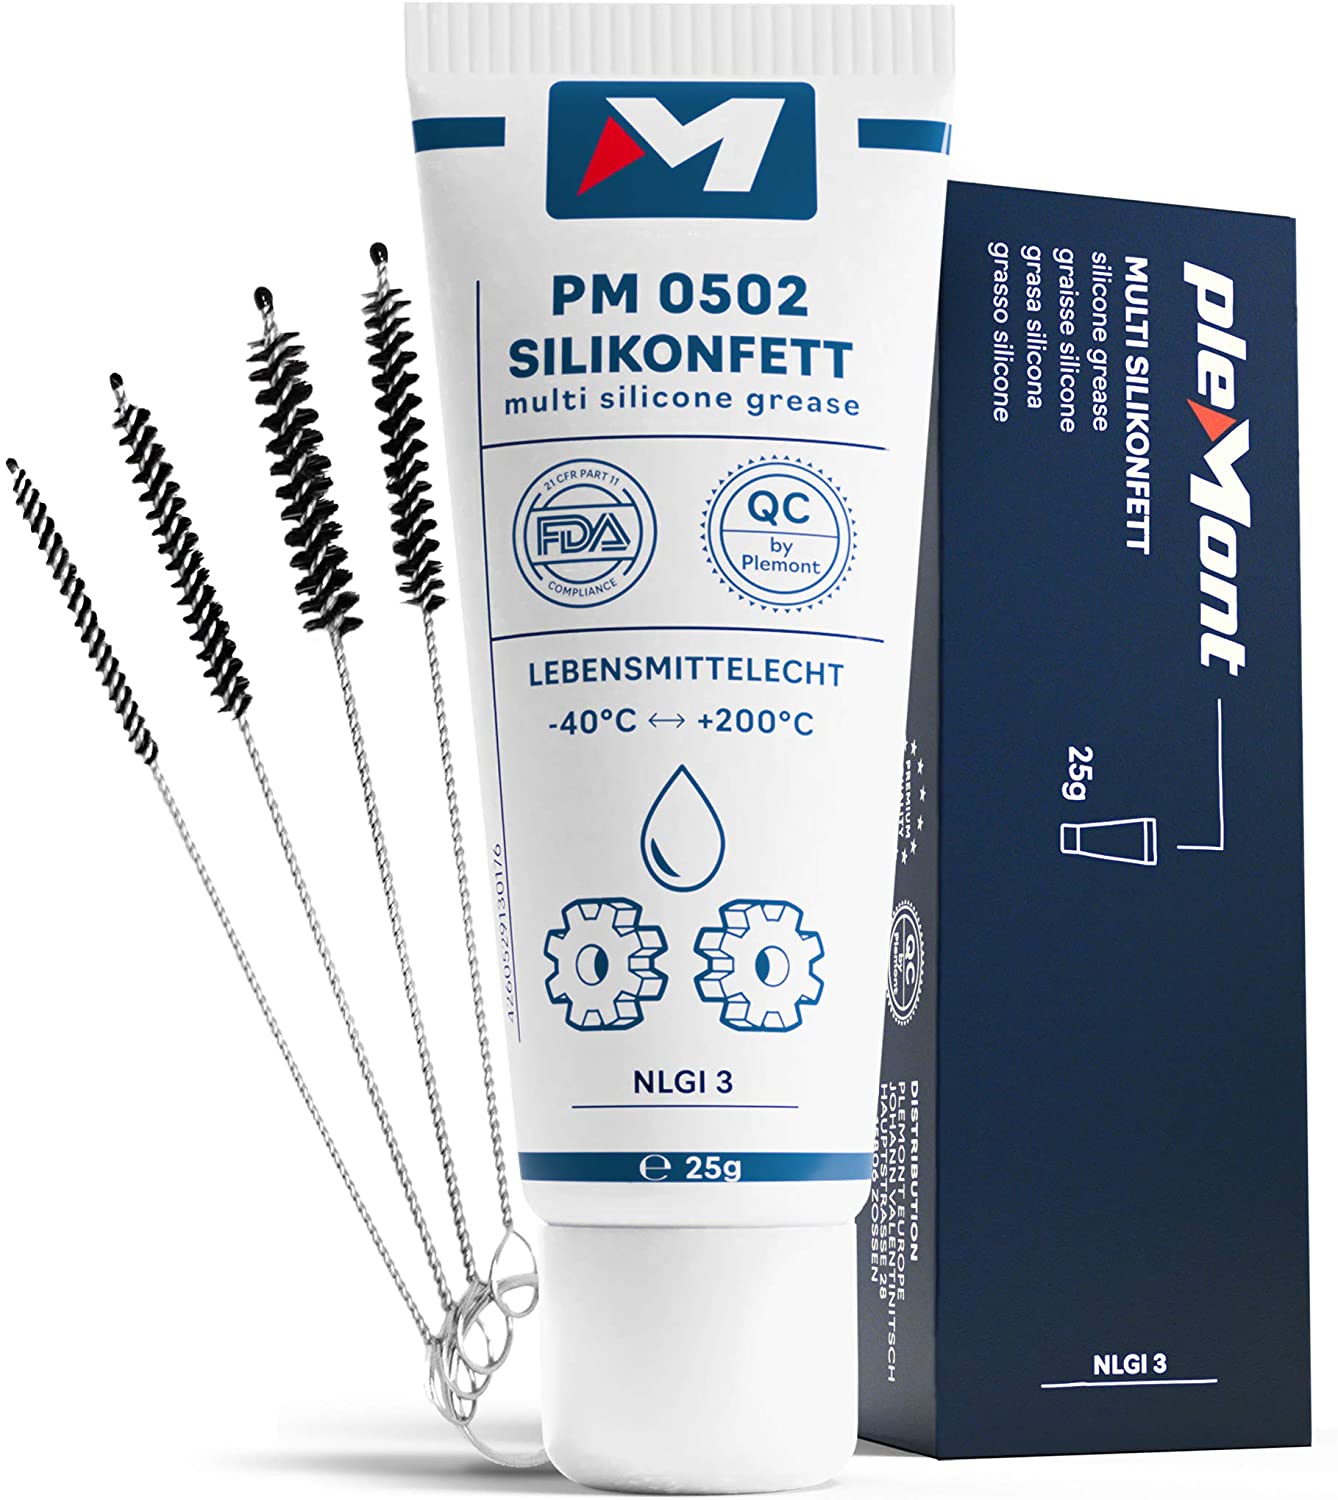 - Plemont 25g. Silicone grease incl. Milk tube brushes. Lubricating grease for fully automatic coffee machines, seals, sanitary facilities. Food-safe tap grease, silicone grease.